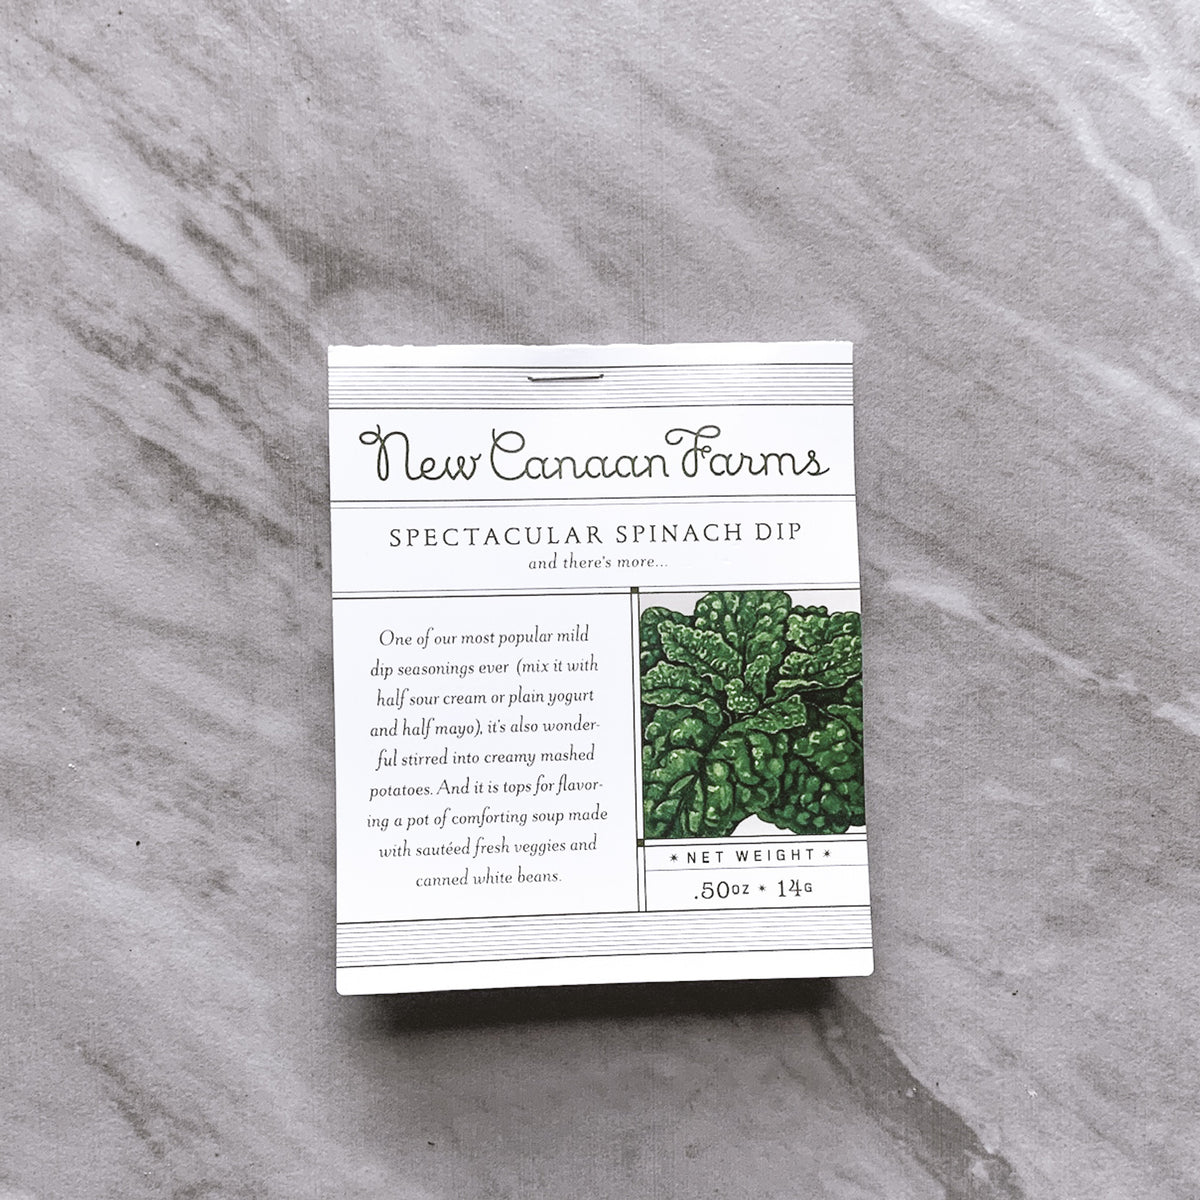 Pantry | New Canaan Farms Spectacular Spinach Dip